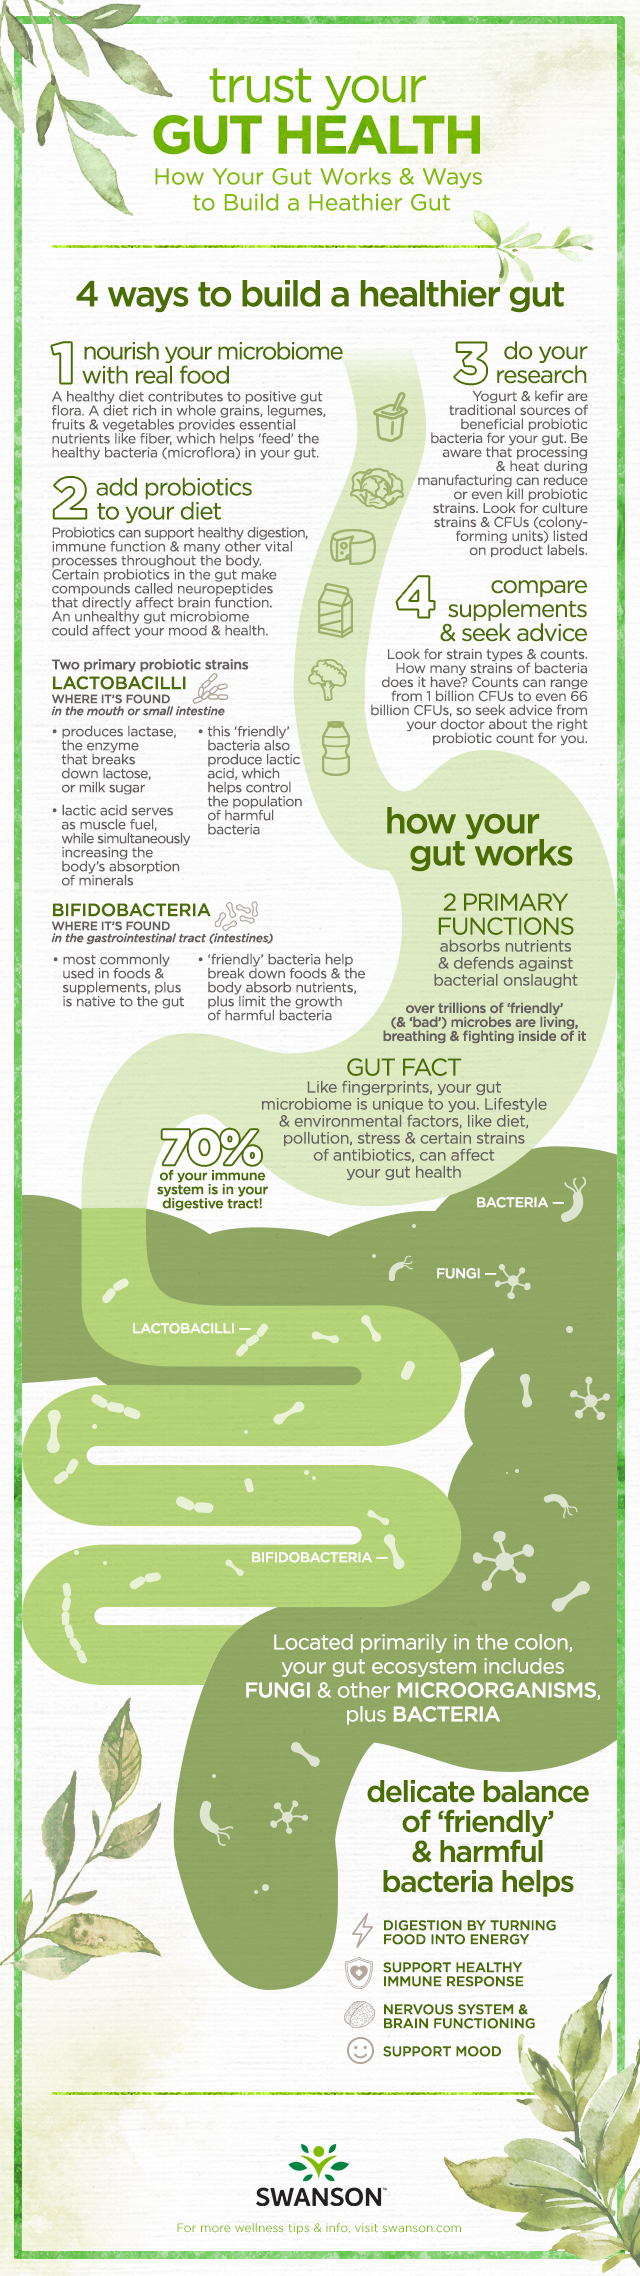 Trust Your Gut Health - how your gut works, plus tips for a healthy gut by Swanson Health